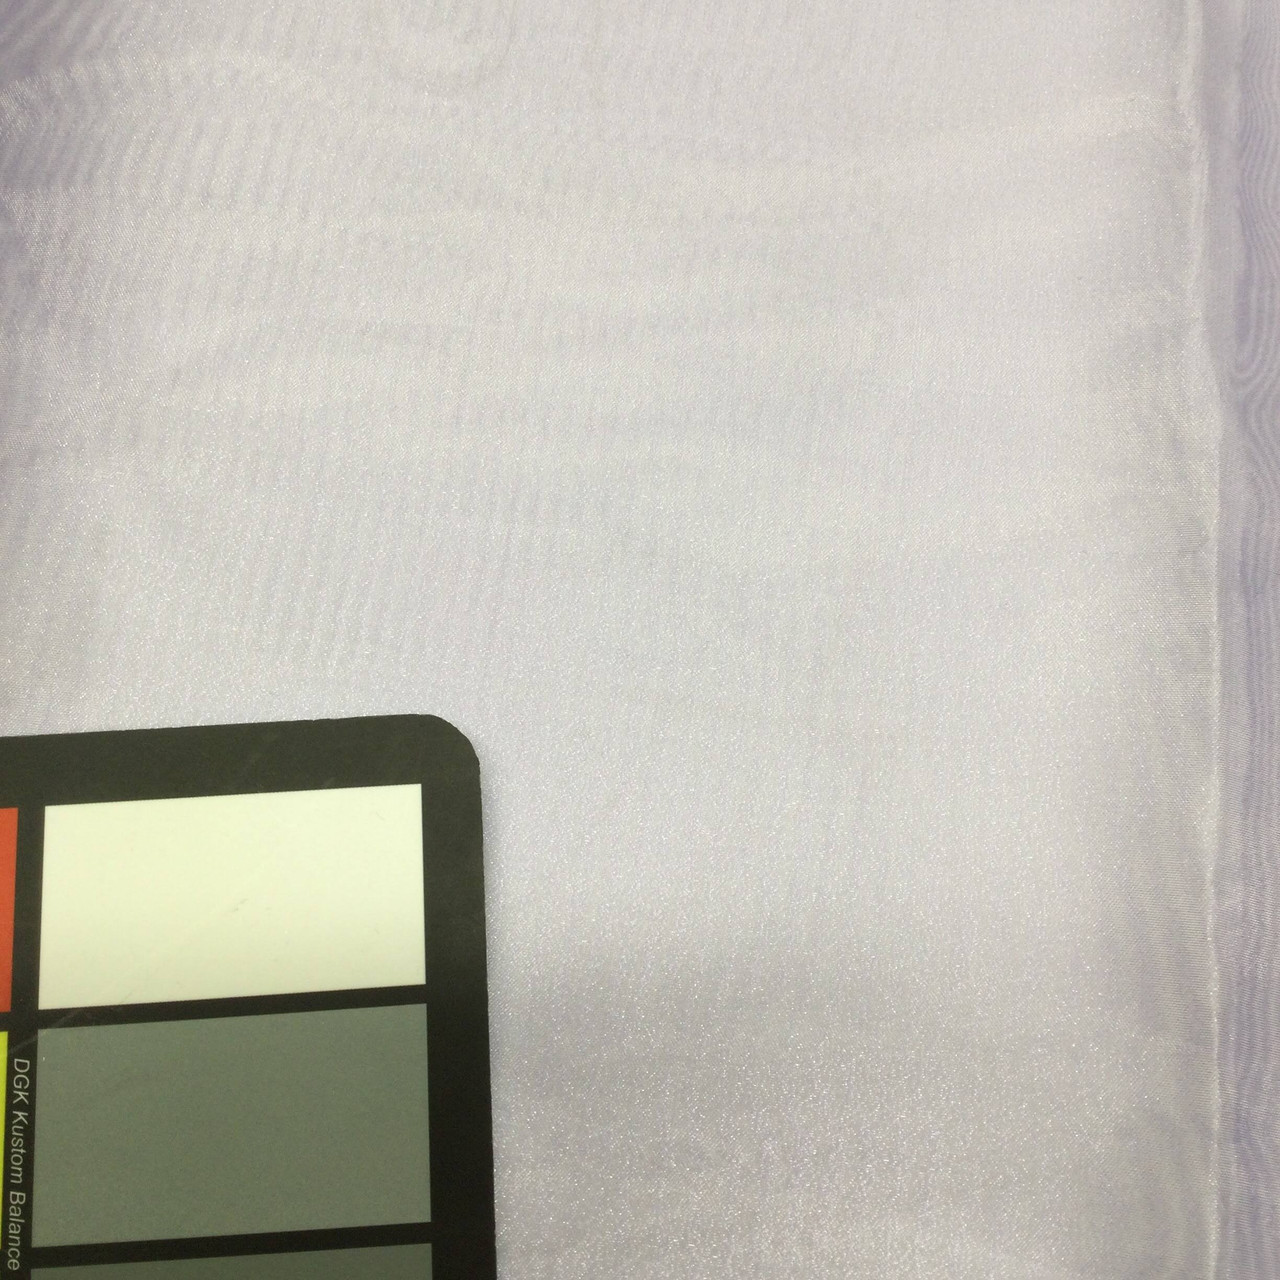 Polyester Taffeta Lining Fabric 100% Polyester 54 Wide for Table Covers,  Gowns, Garments, Curtains, Drapery and Dresses Sold by The Yard (5 Yards